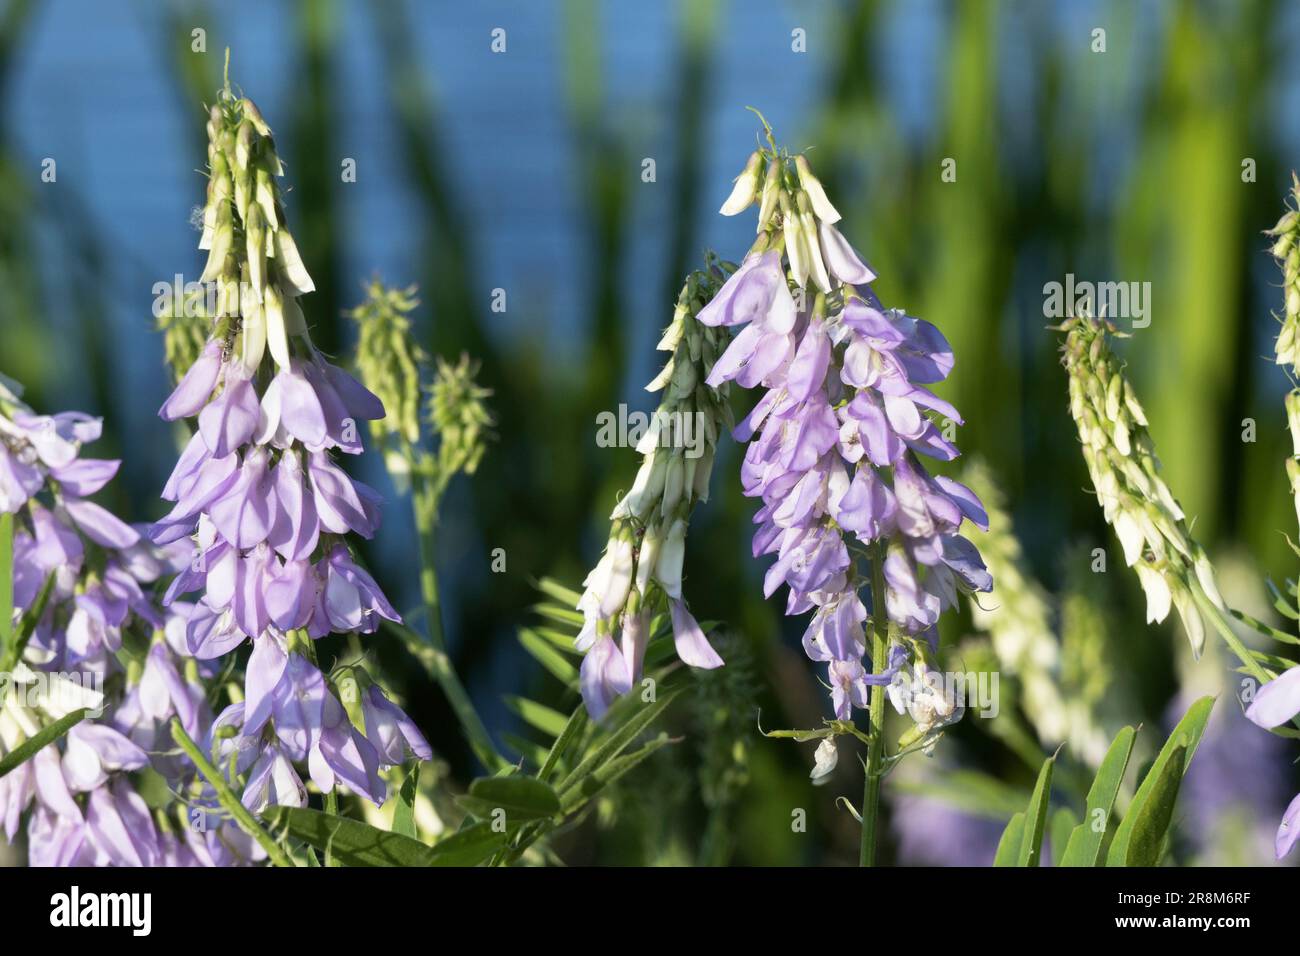 Goats Rue Galega Officinalis in a wild flower growing often on the side of wetlands Stock Photo